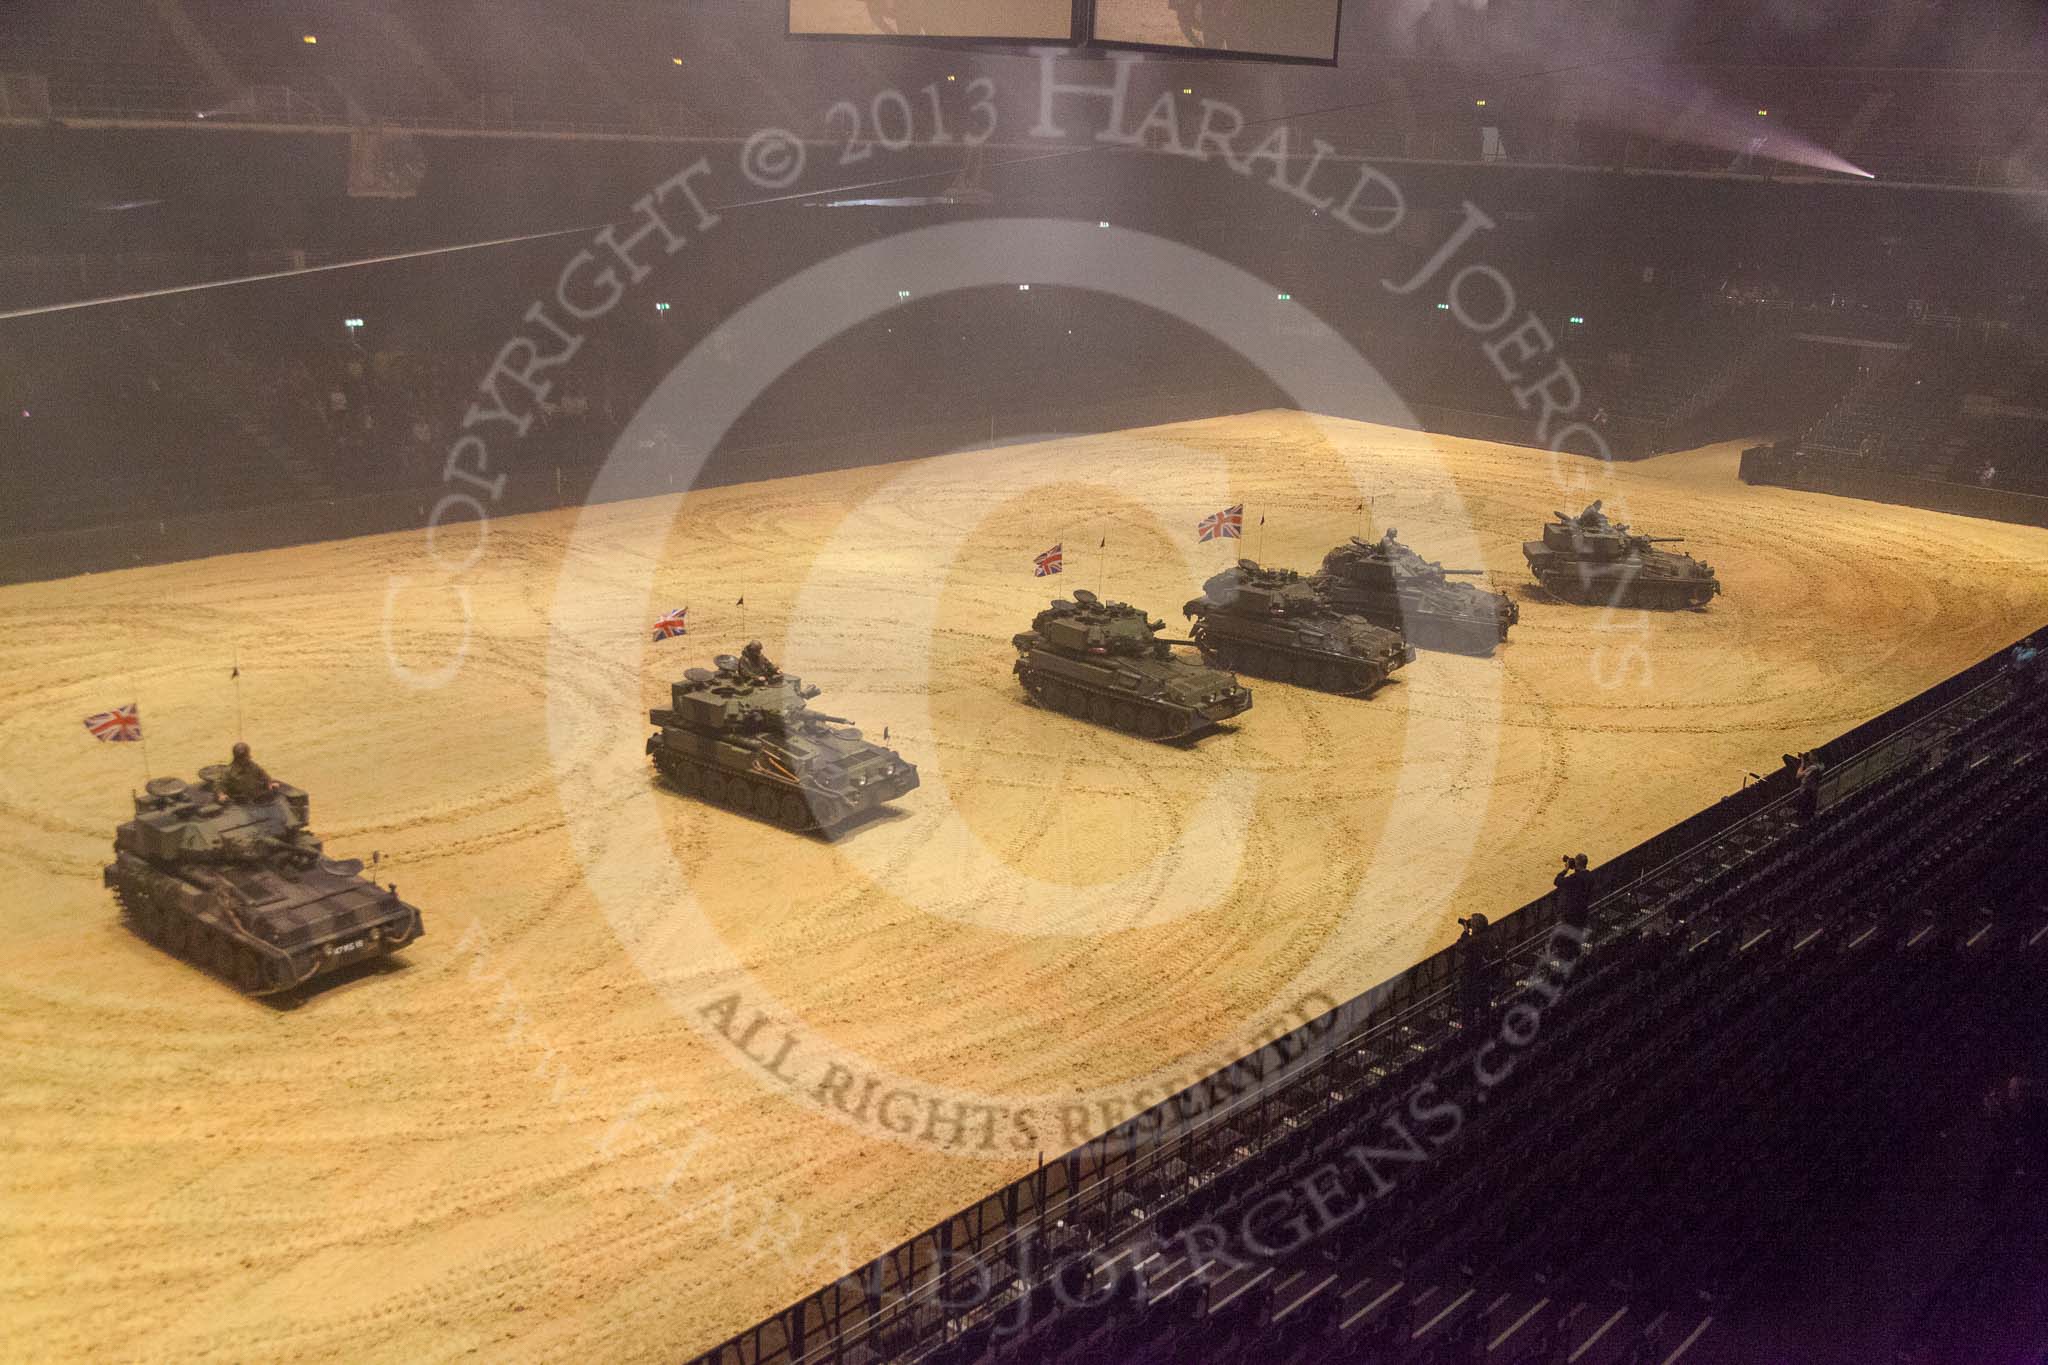 British Military Tournament 2013.
Earls Court,
London SW5,

United Kingdom,
on 06 December 2013 at 16:23, image #401